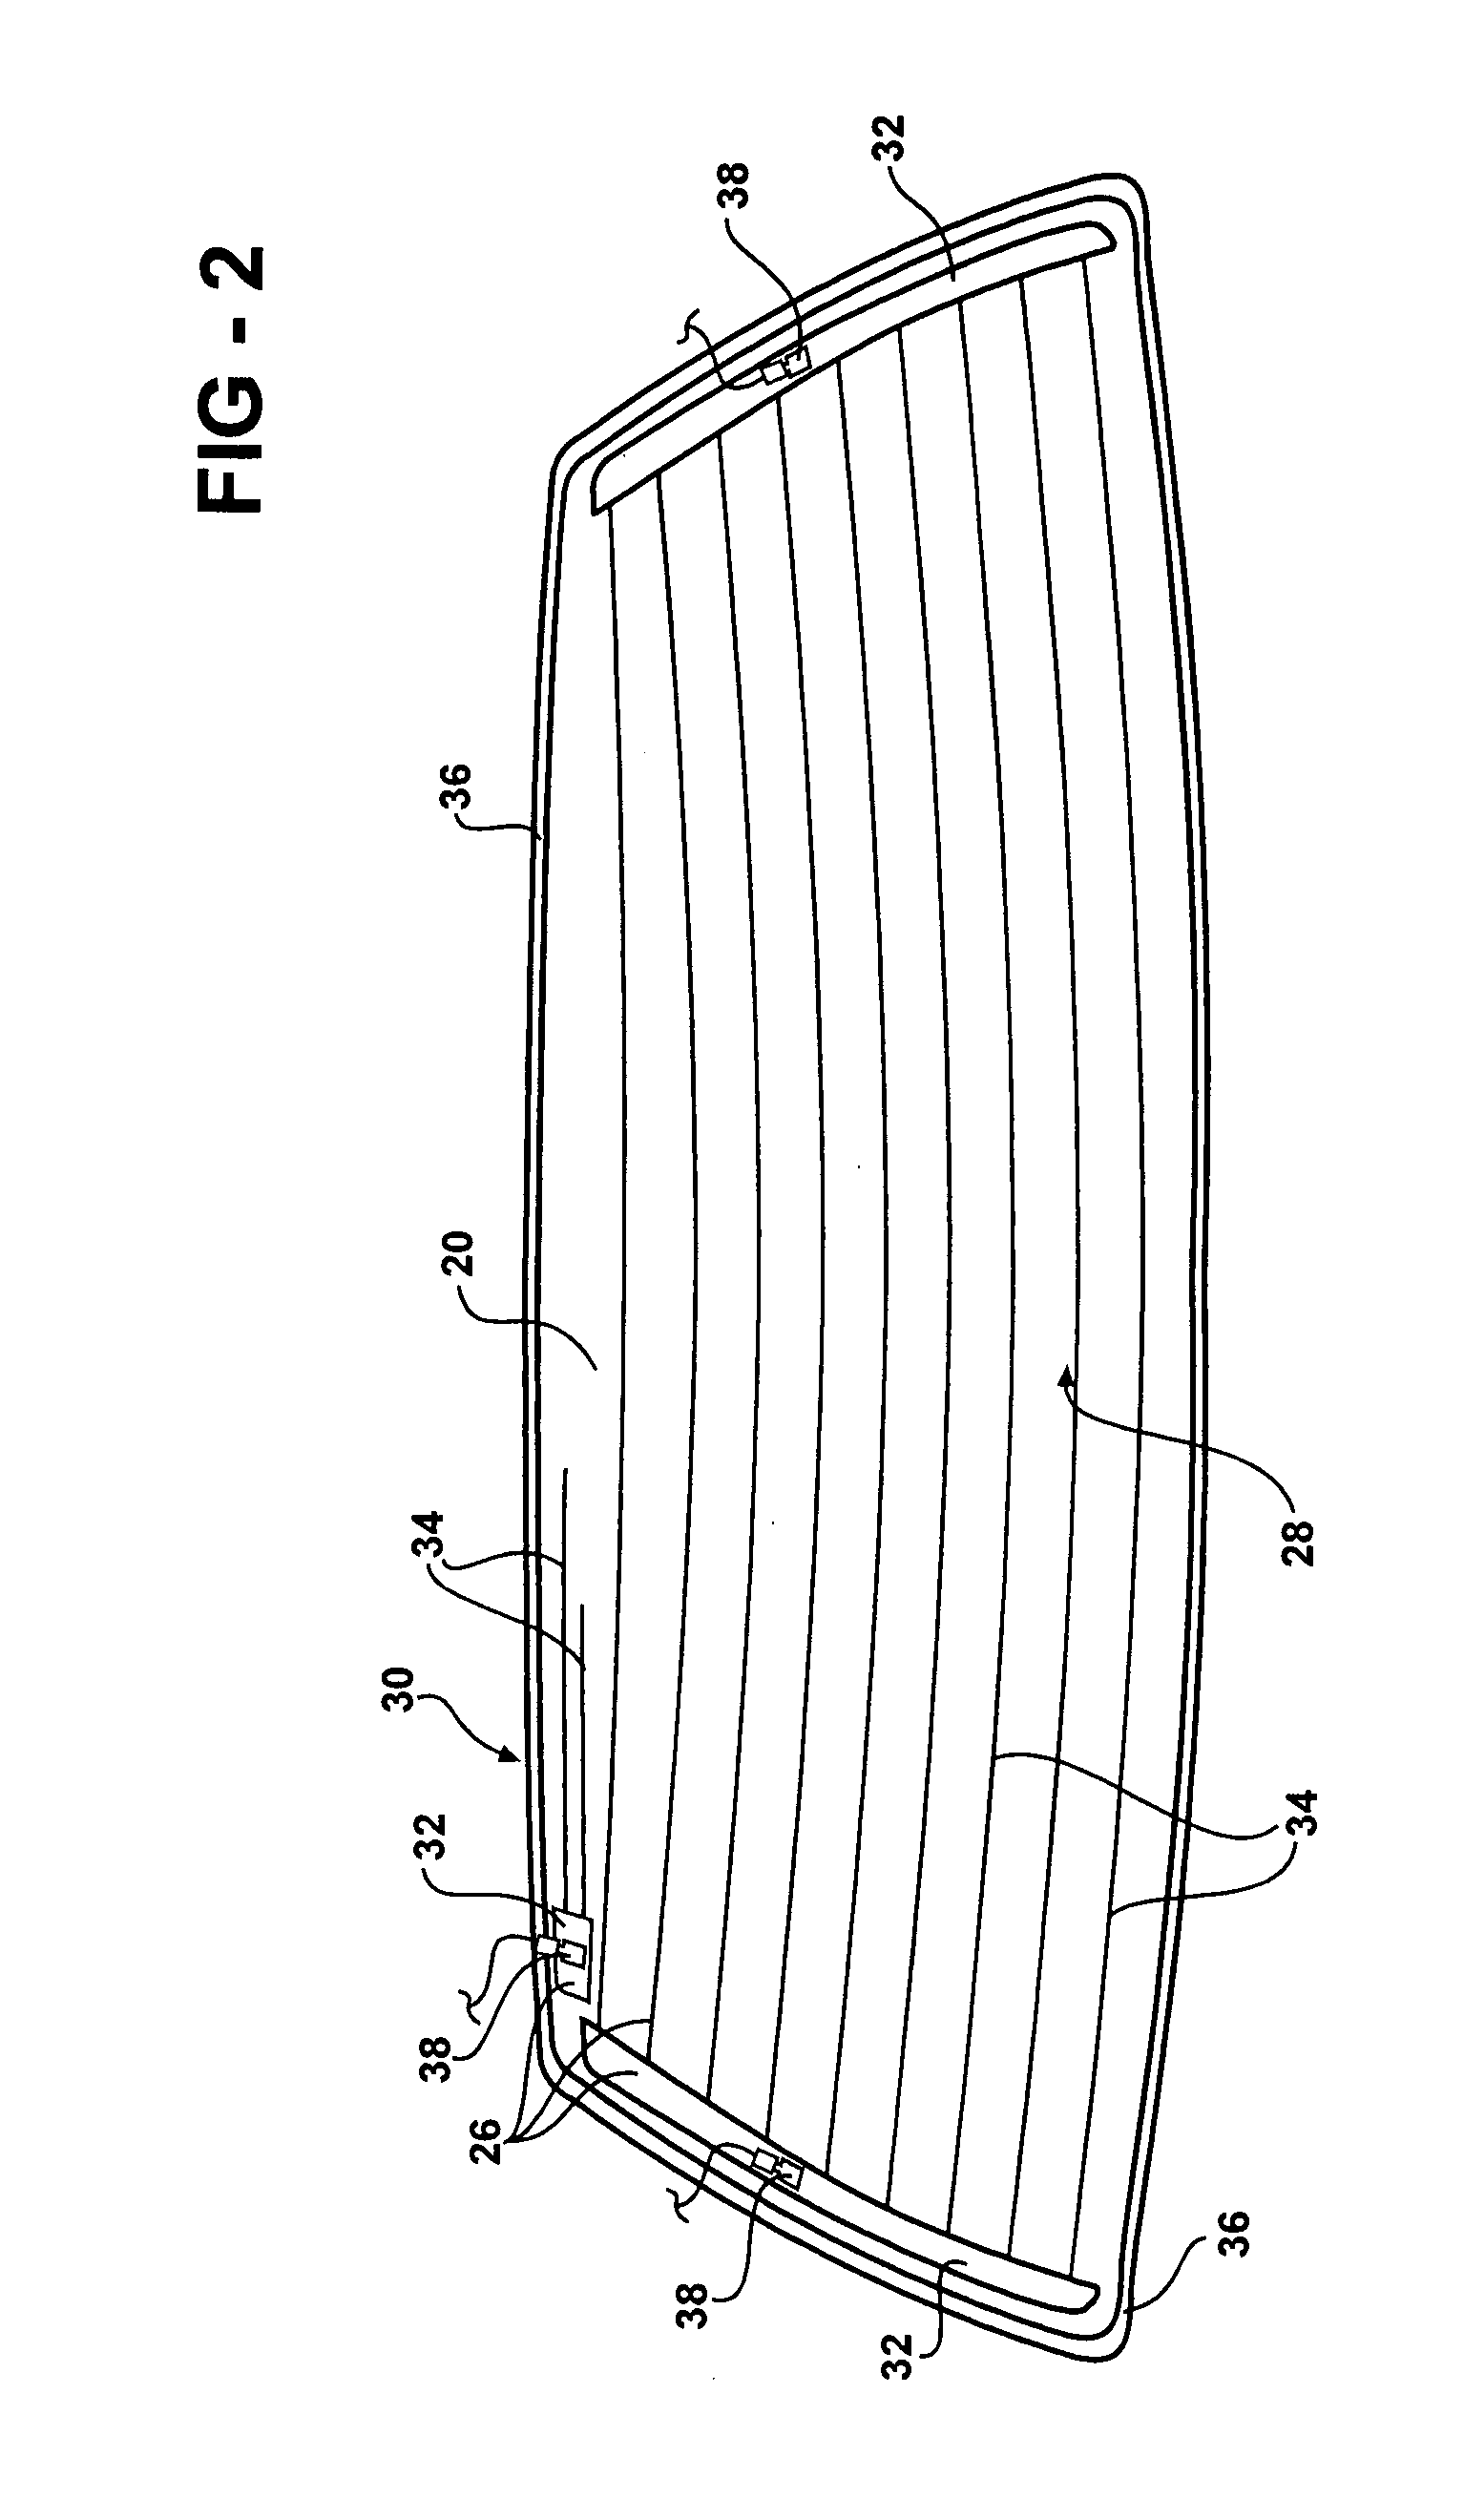 Window pane and a method of bonding a connector to the window pane